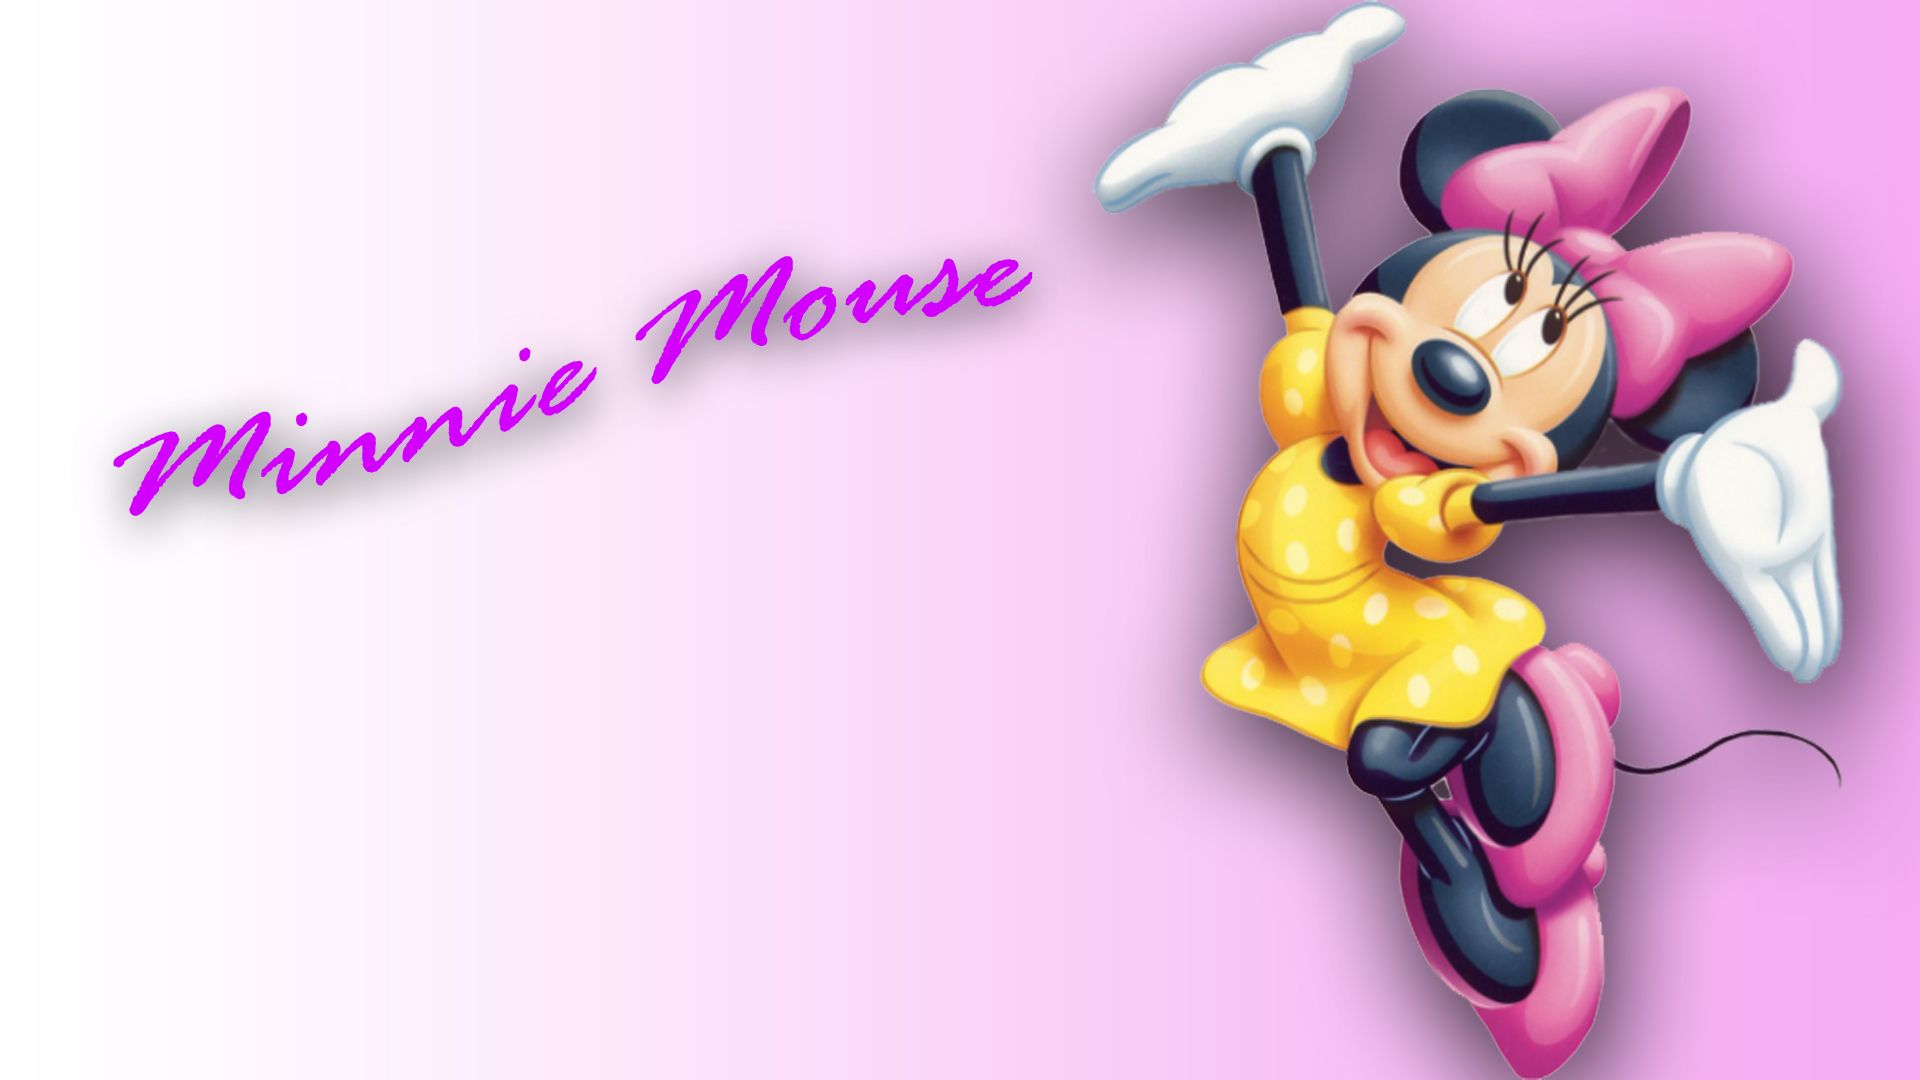 Minnie mouse wallpaper for your computer desktop - Minnie Mouse